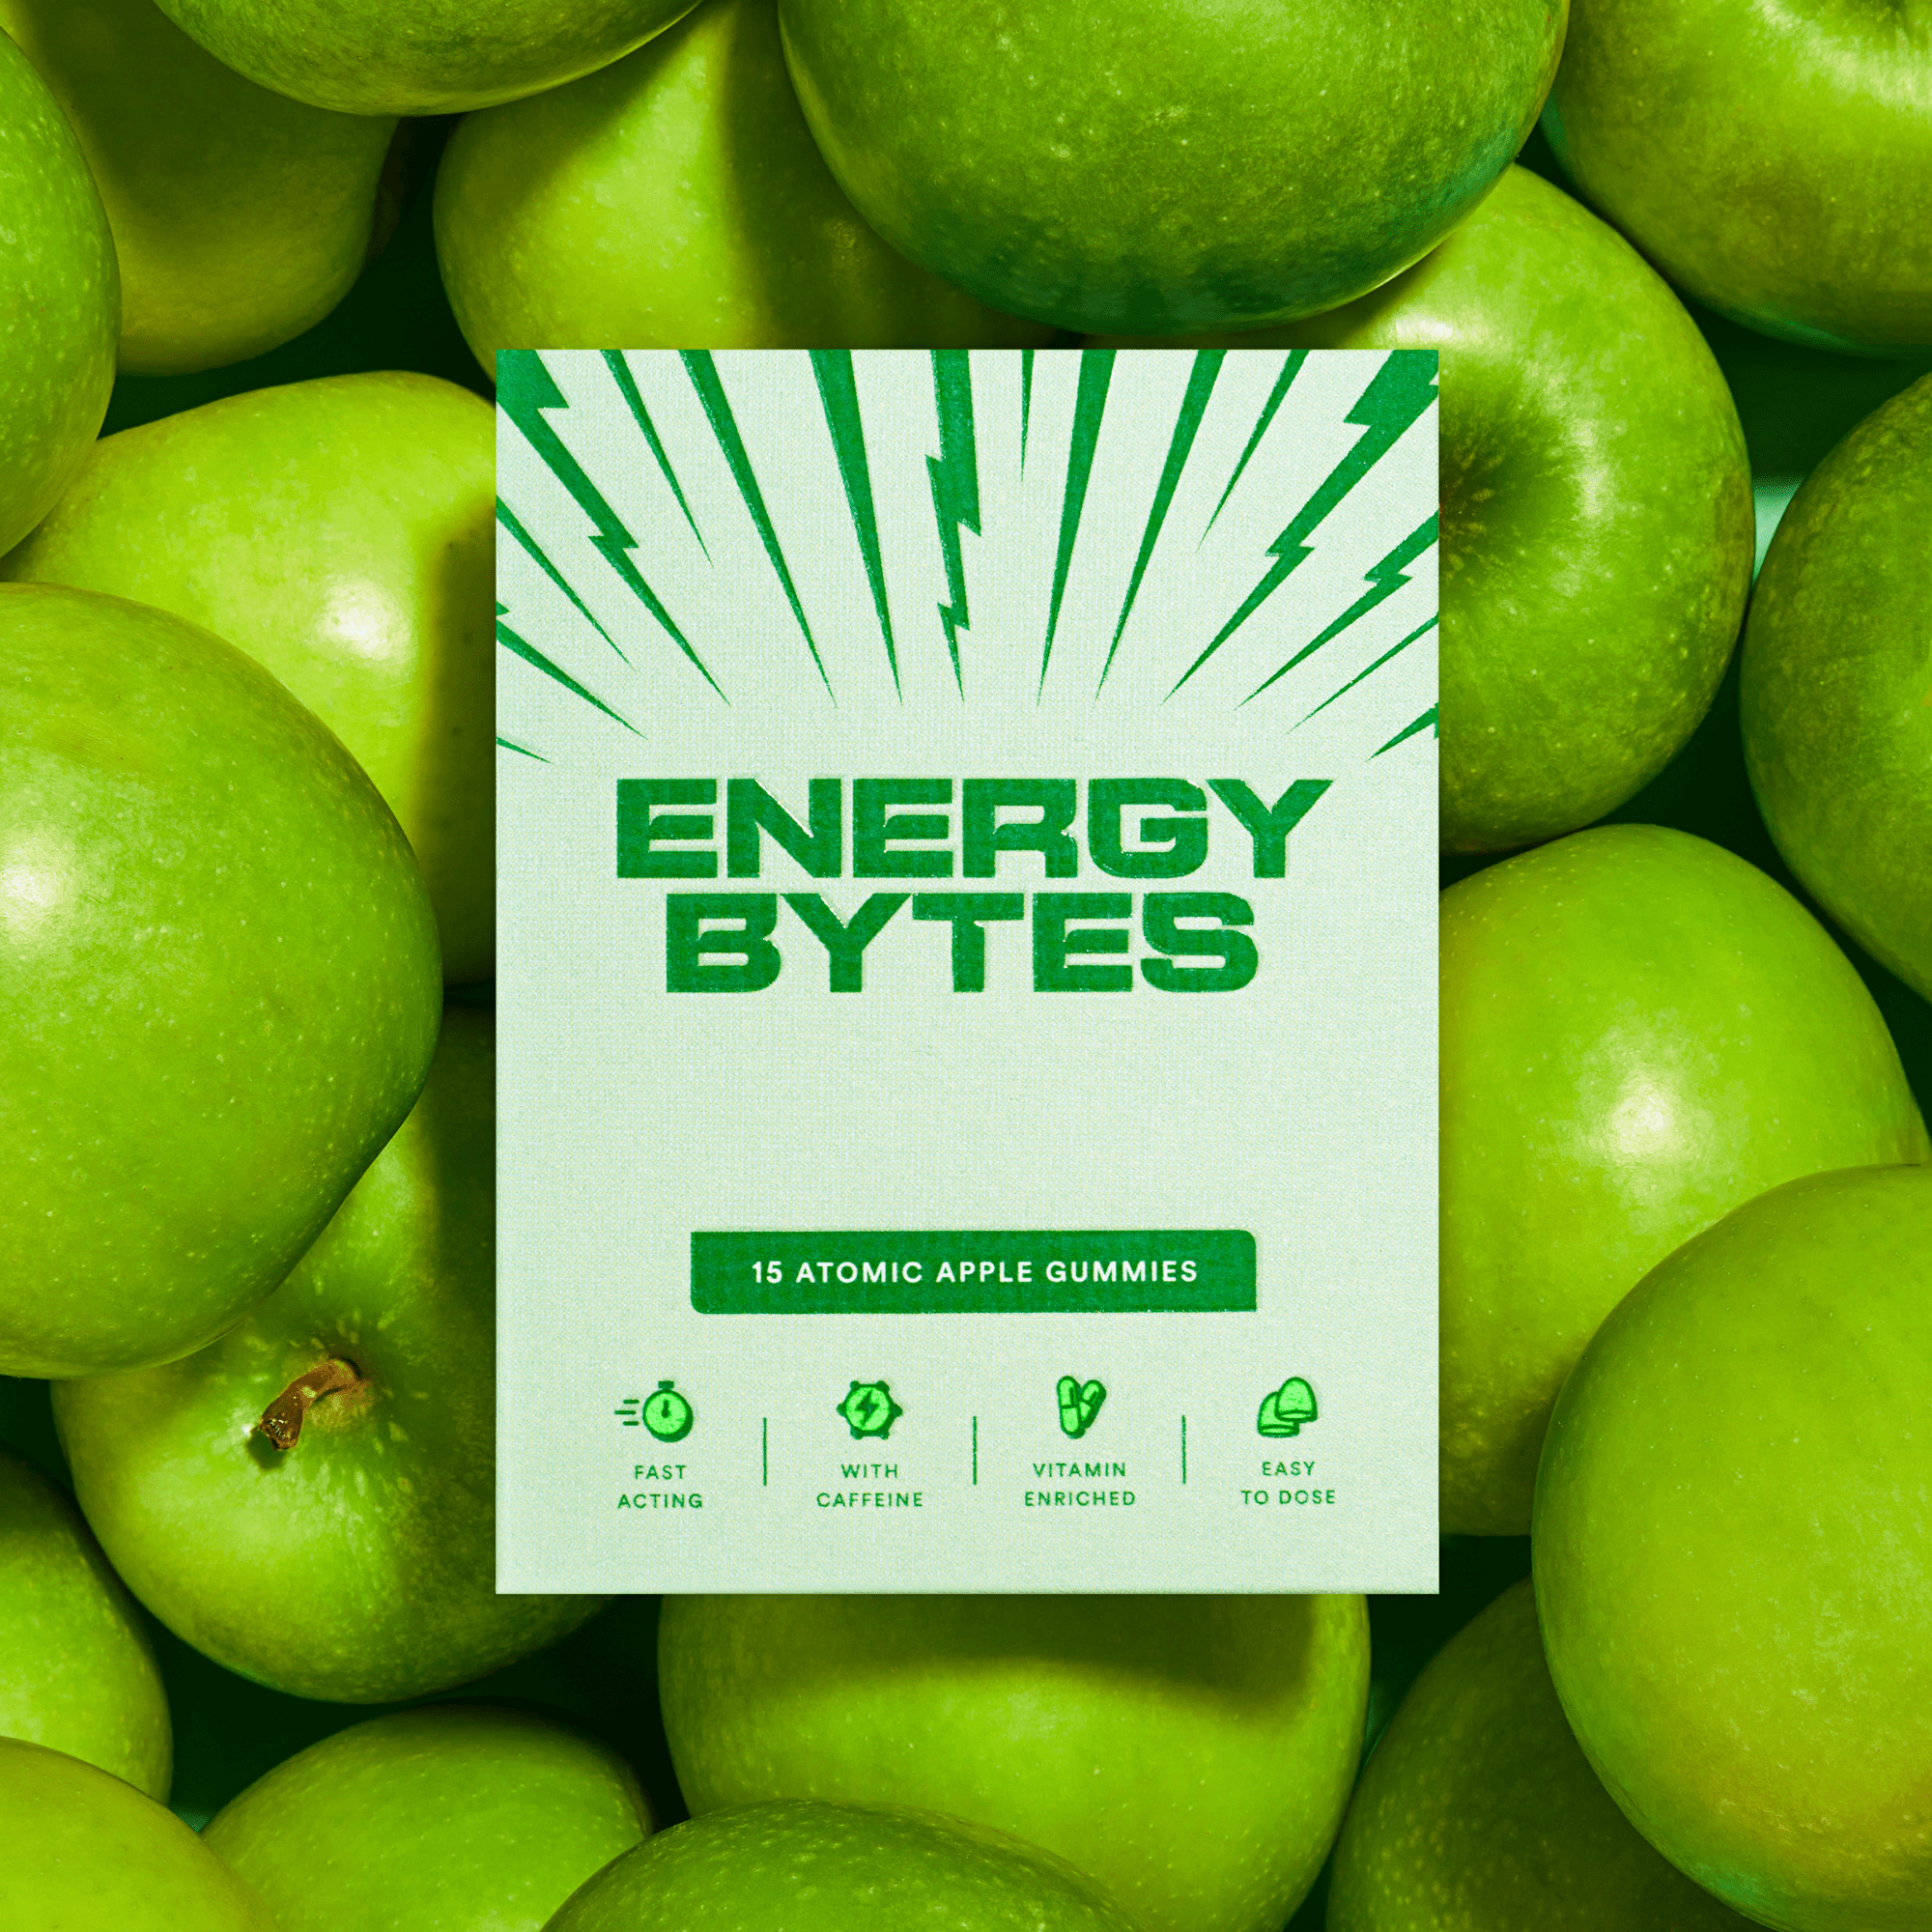 Energy Bytes Atomic Apple Gummies pack with green bursts, set against a background of crisp green apples, showcasing the natural apple flavor and energy boost.